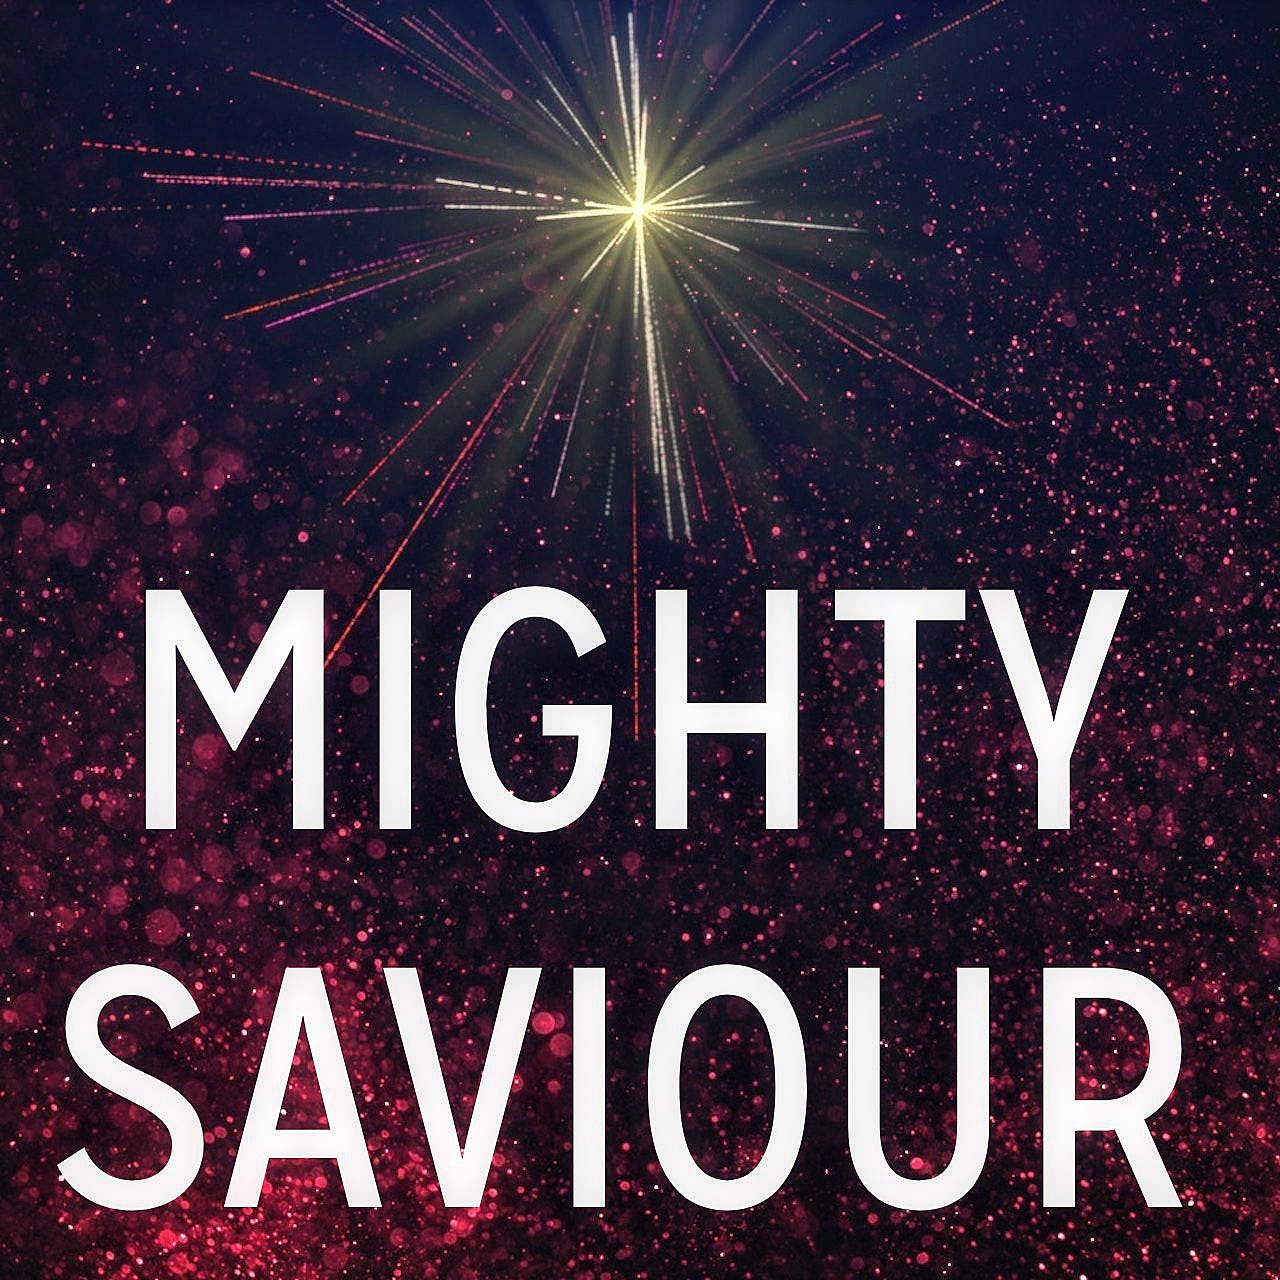 And His Name Shall Be Called: Mighty Saviour